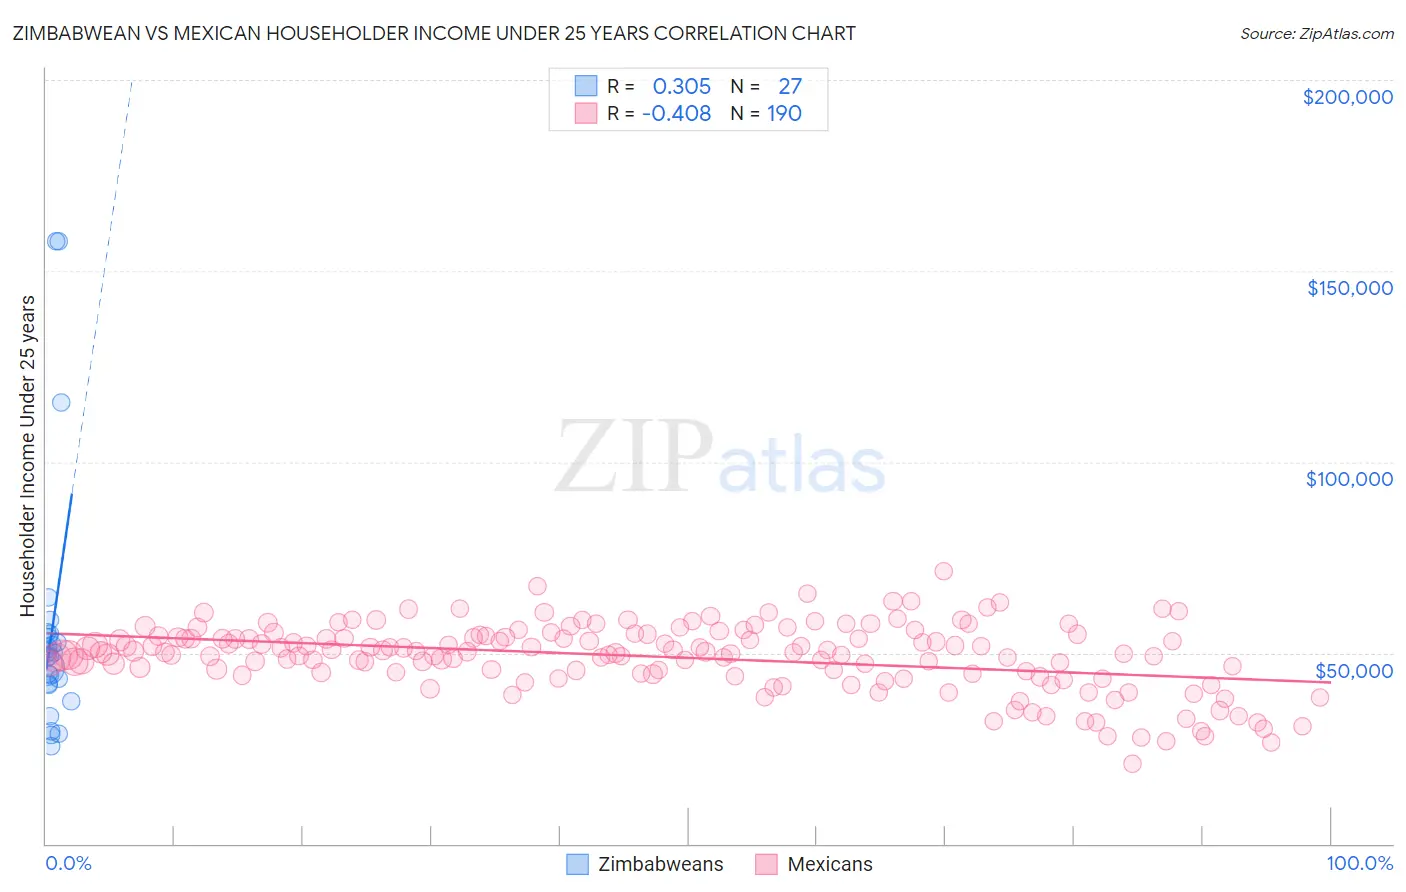 Zimbabwean vs Mexican Householder Income Under 25 years